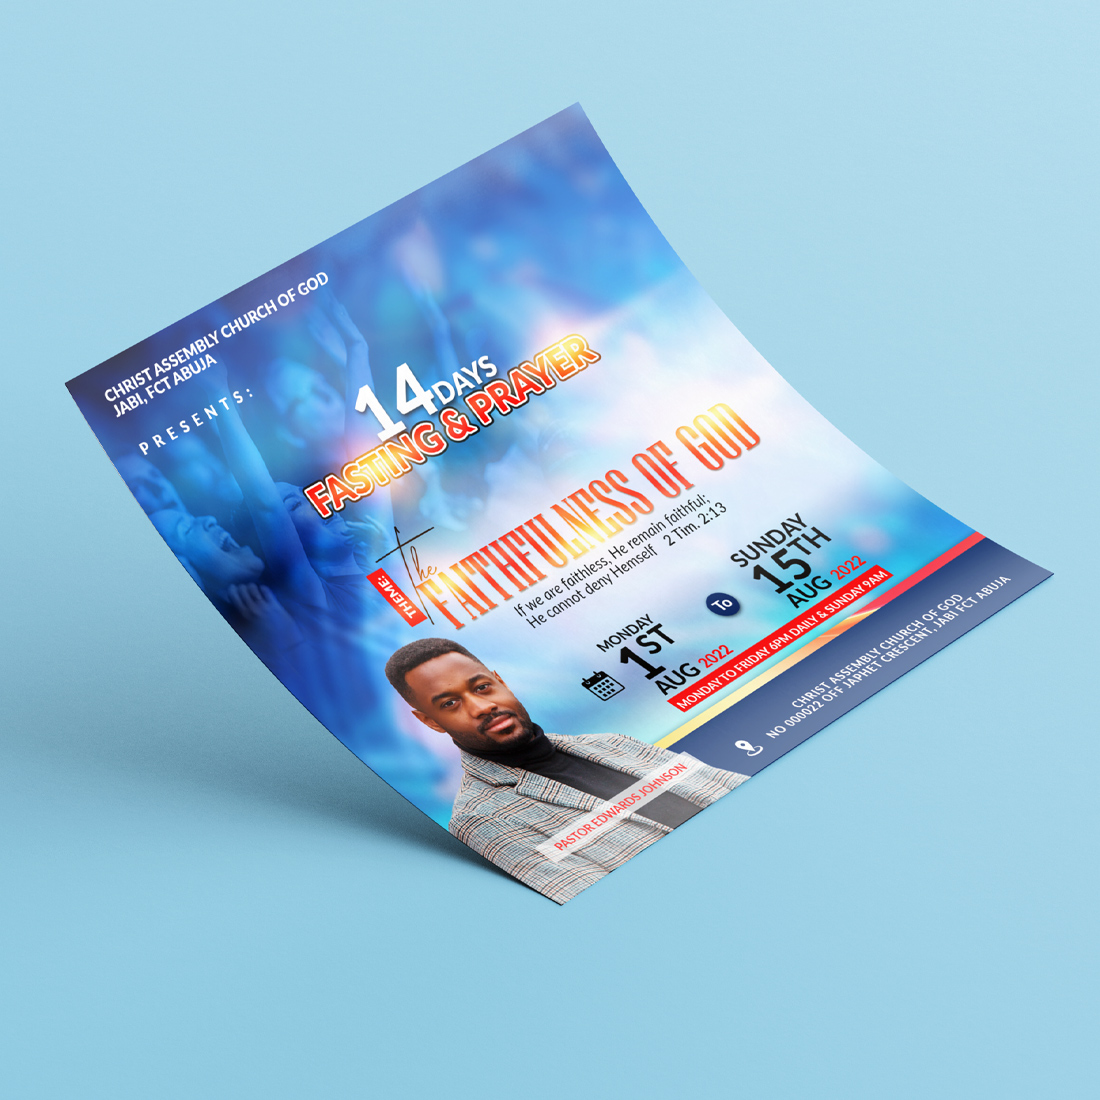 14 Days Prayer and Fasting Church Flyer Template Design cover image.